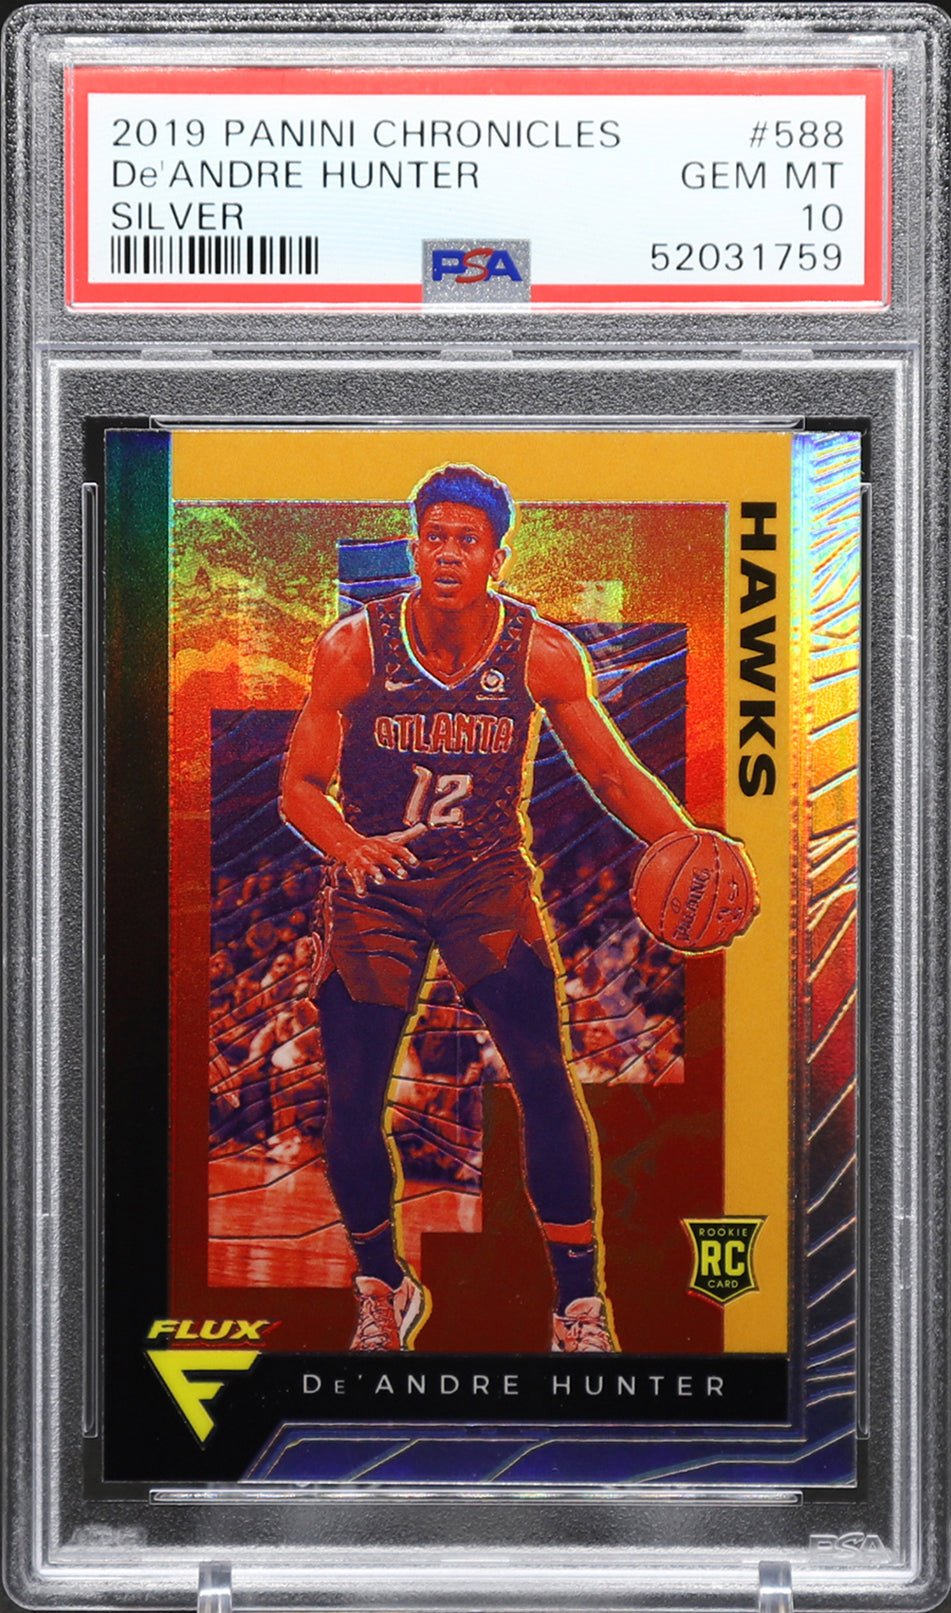 DE'ANDRE HUNTER PSA 10 2019-20 Panini Chronicles RC Flux Silver Prizm #588 Basketball Graded Cards Parallel RC - Hobby Gems